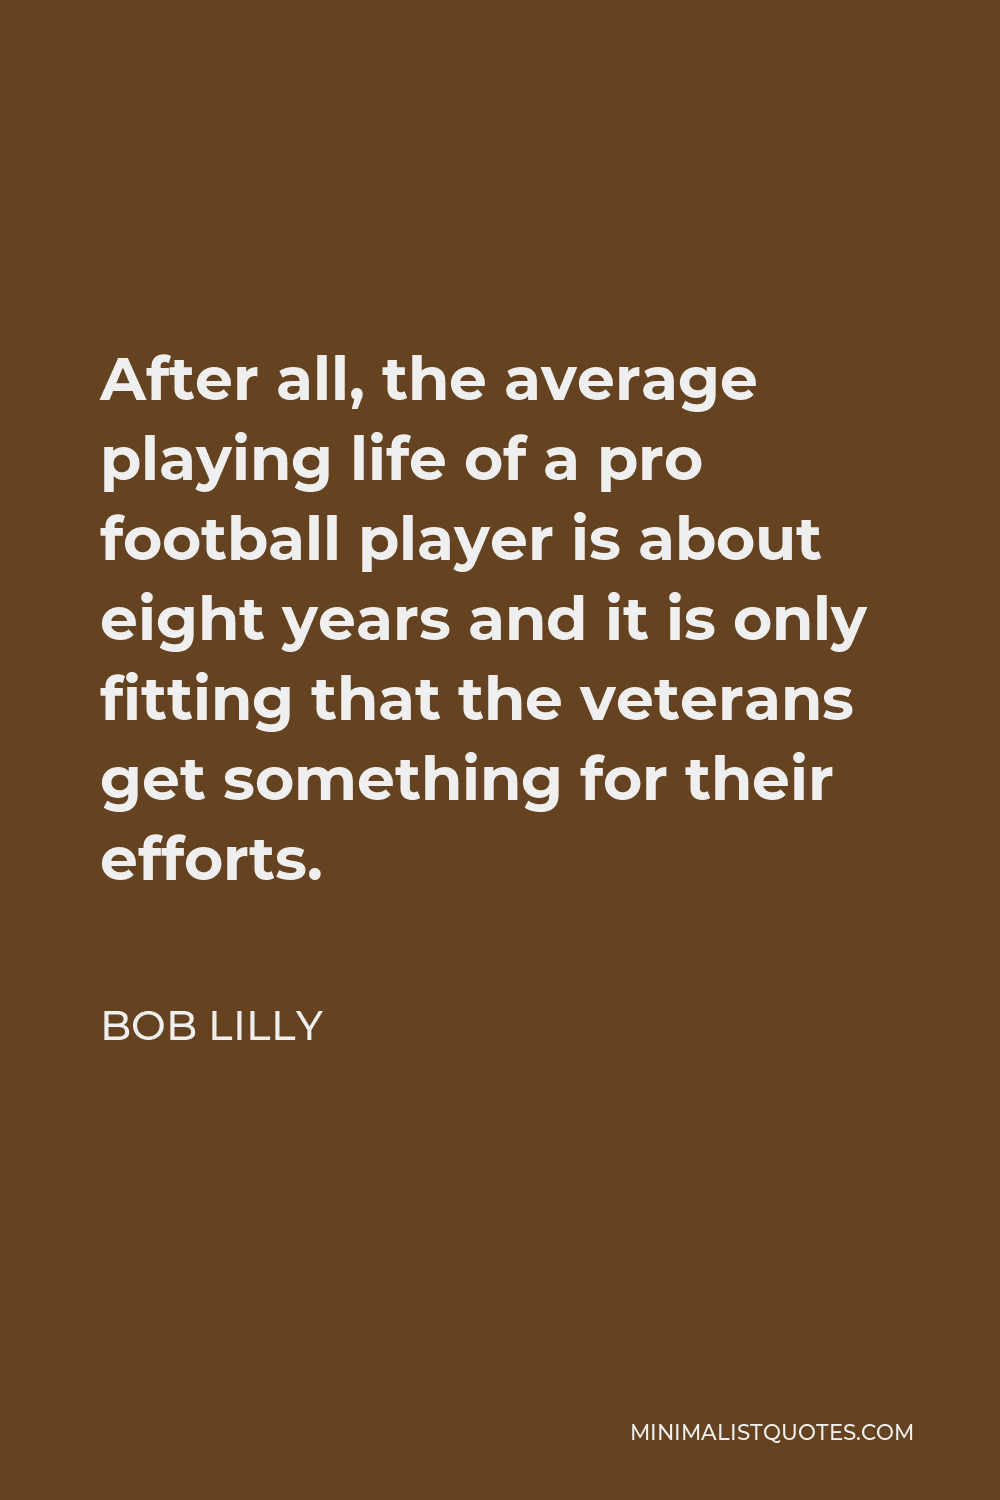 Bob Lilly Quote - After all, the average playing life of a pro football player is about eight years and it is only fitting that the veterans get something for their efforts.